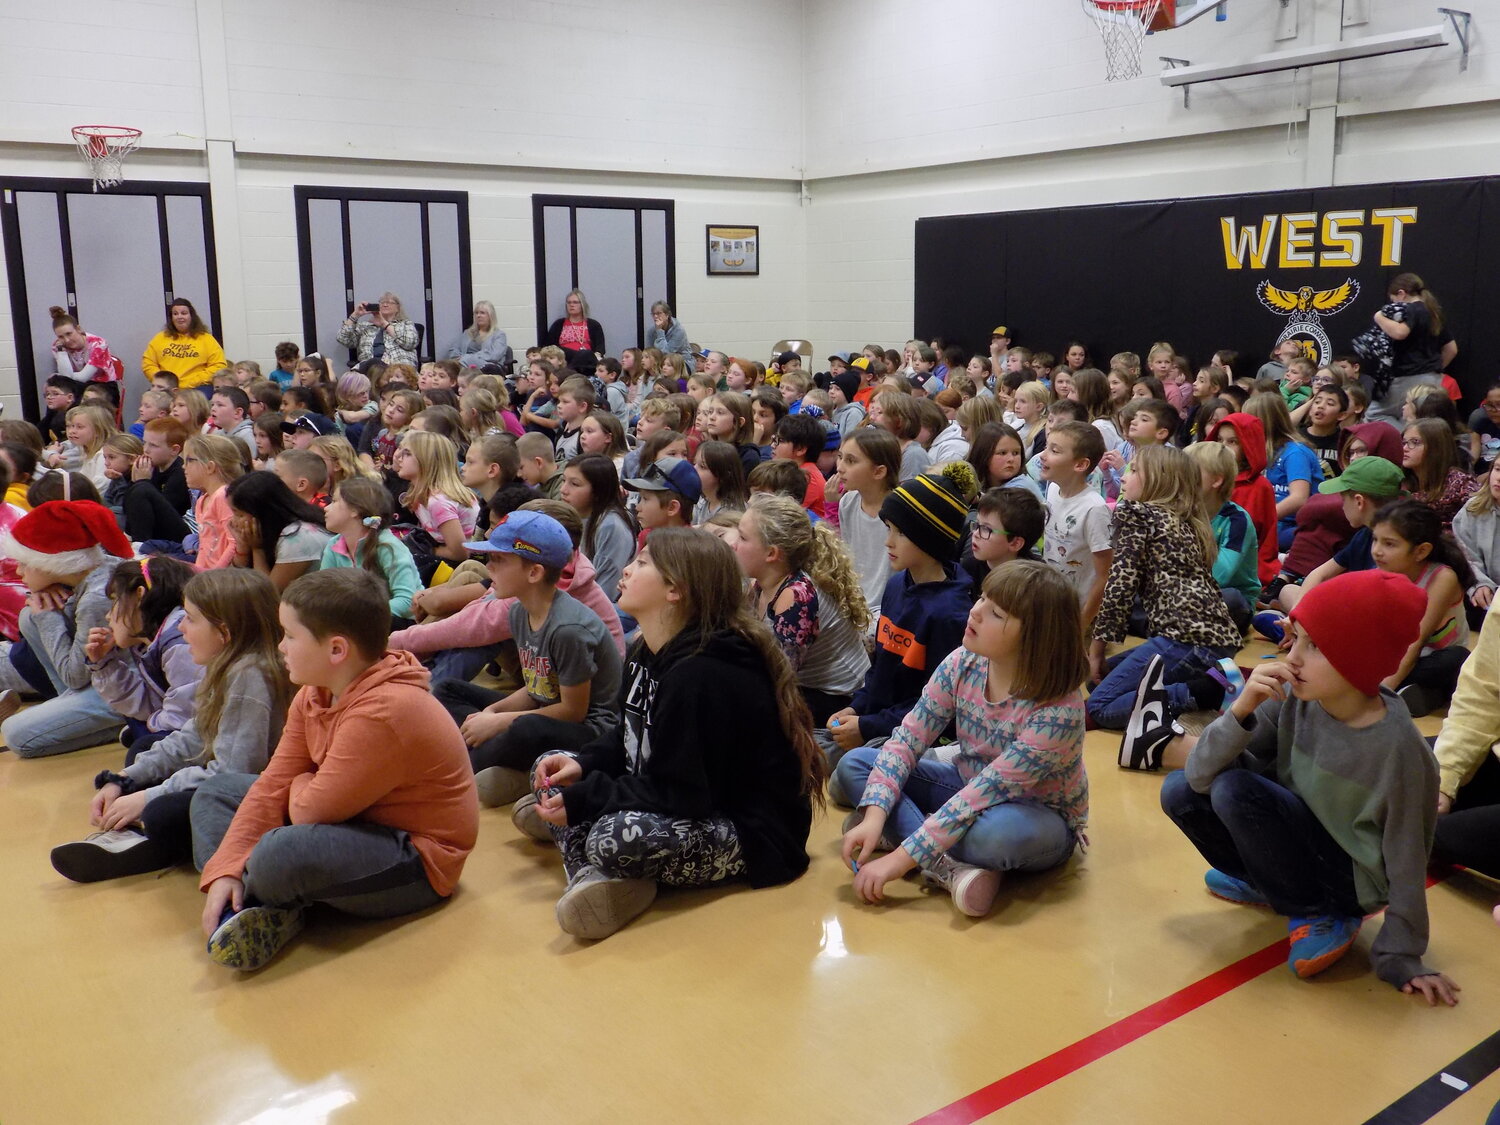 Elementary students filled half the gym during the performance, which had them thinking ahead to their own lives as members of a band or orchestra.